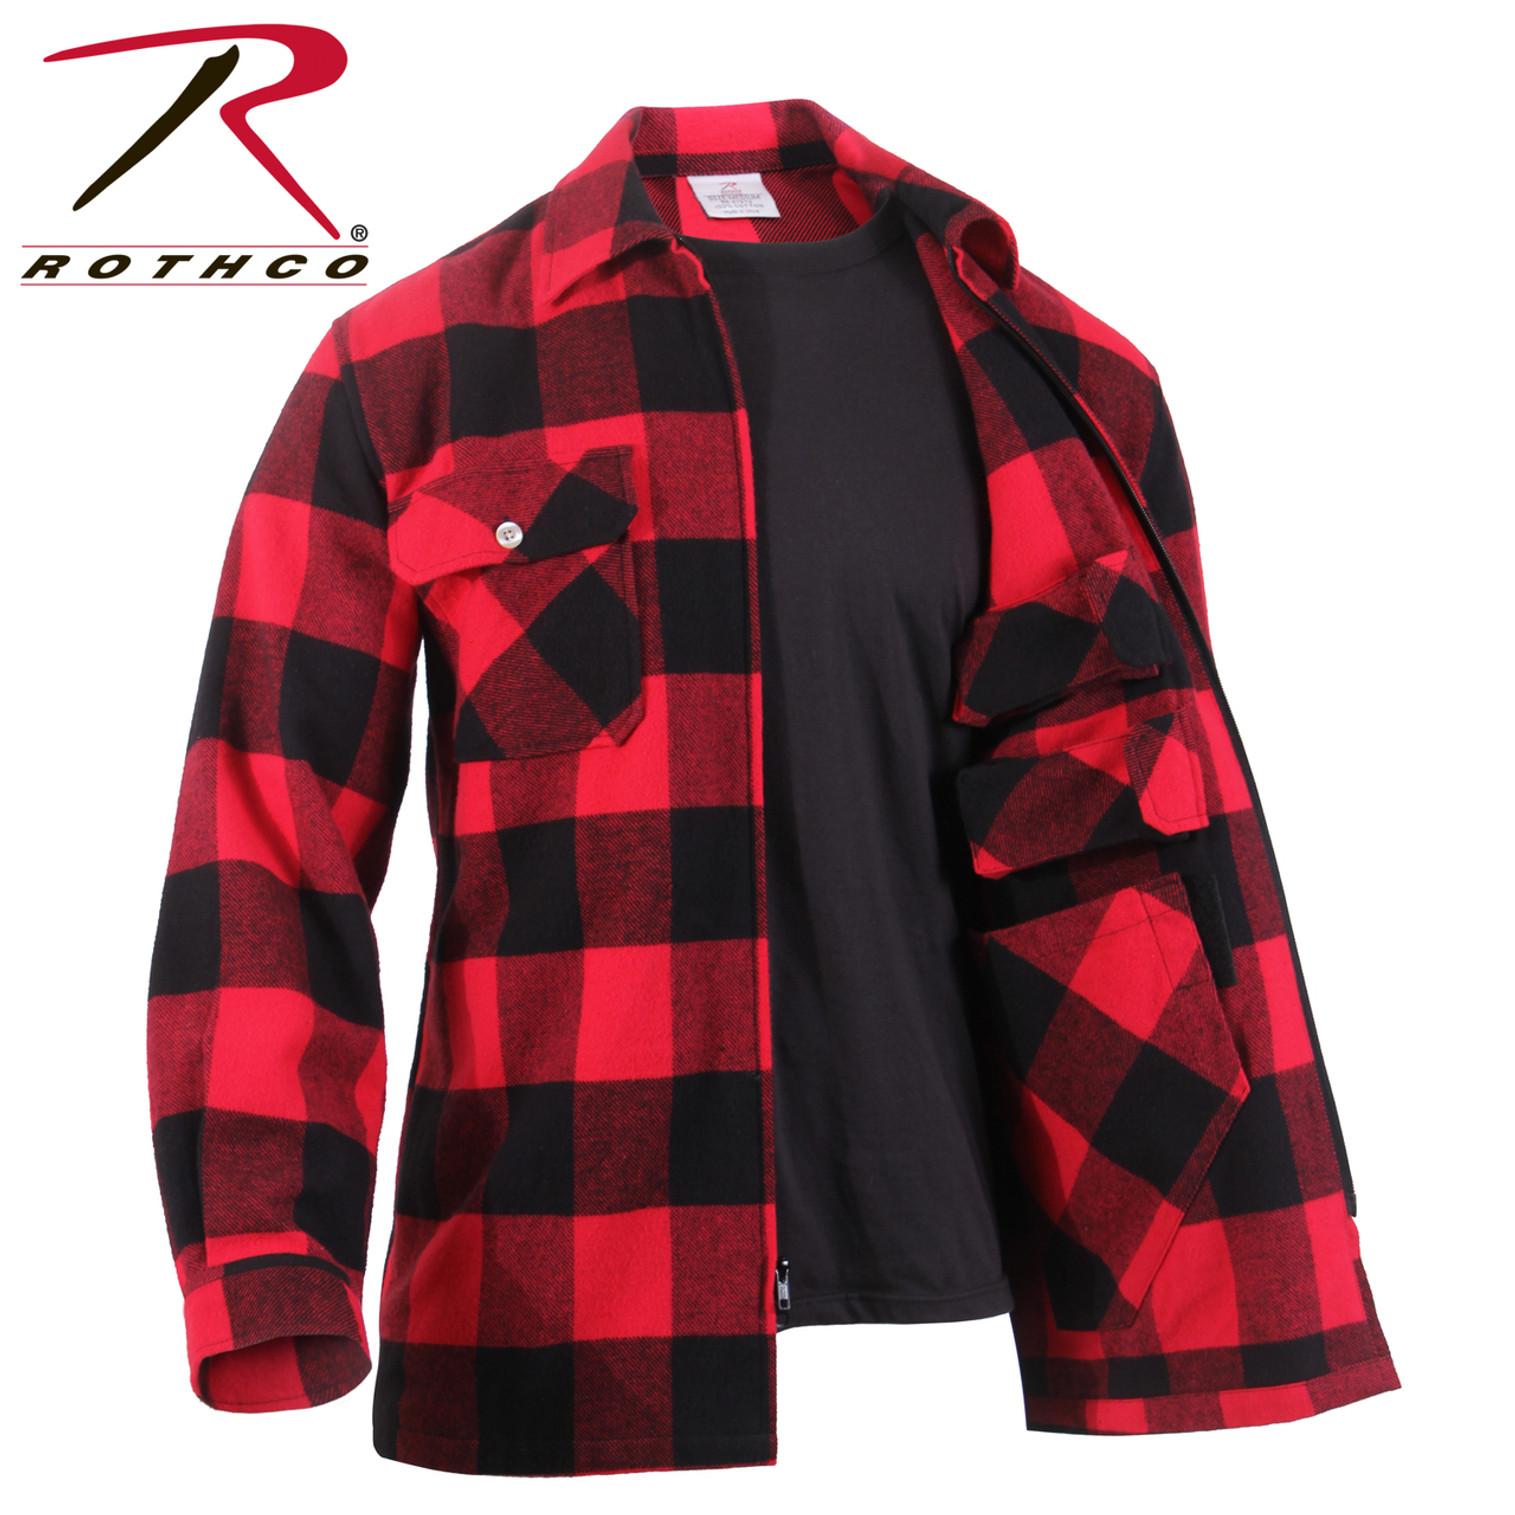 Rothco Concealed Carry Flannel Shirt - Red